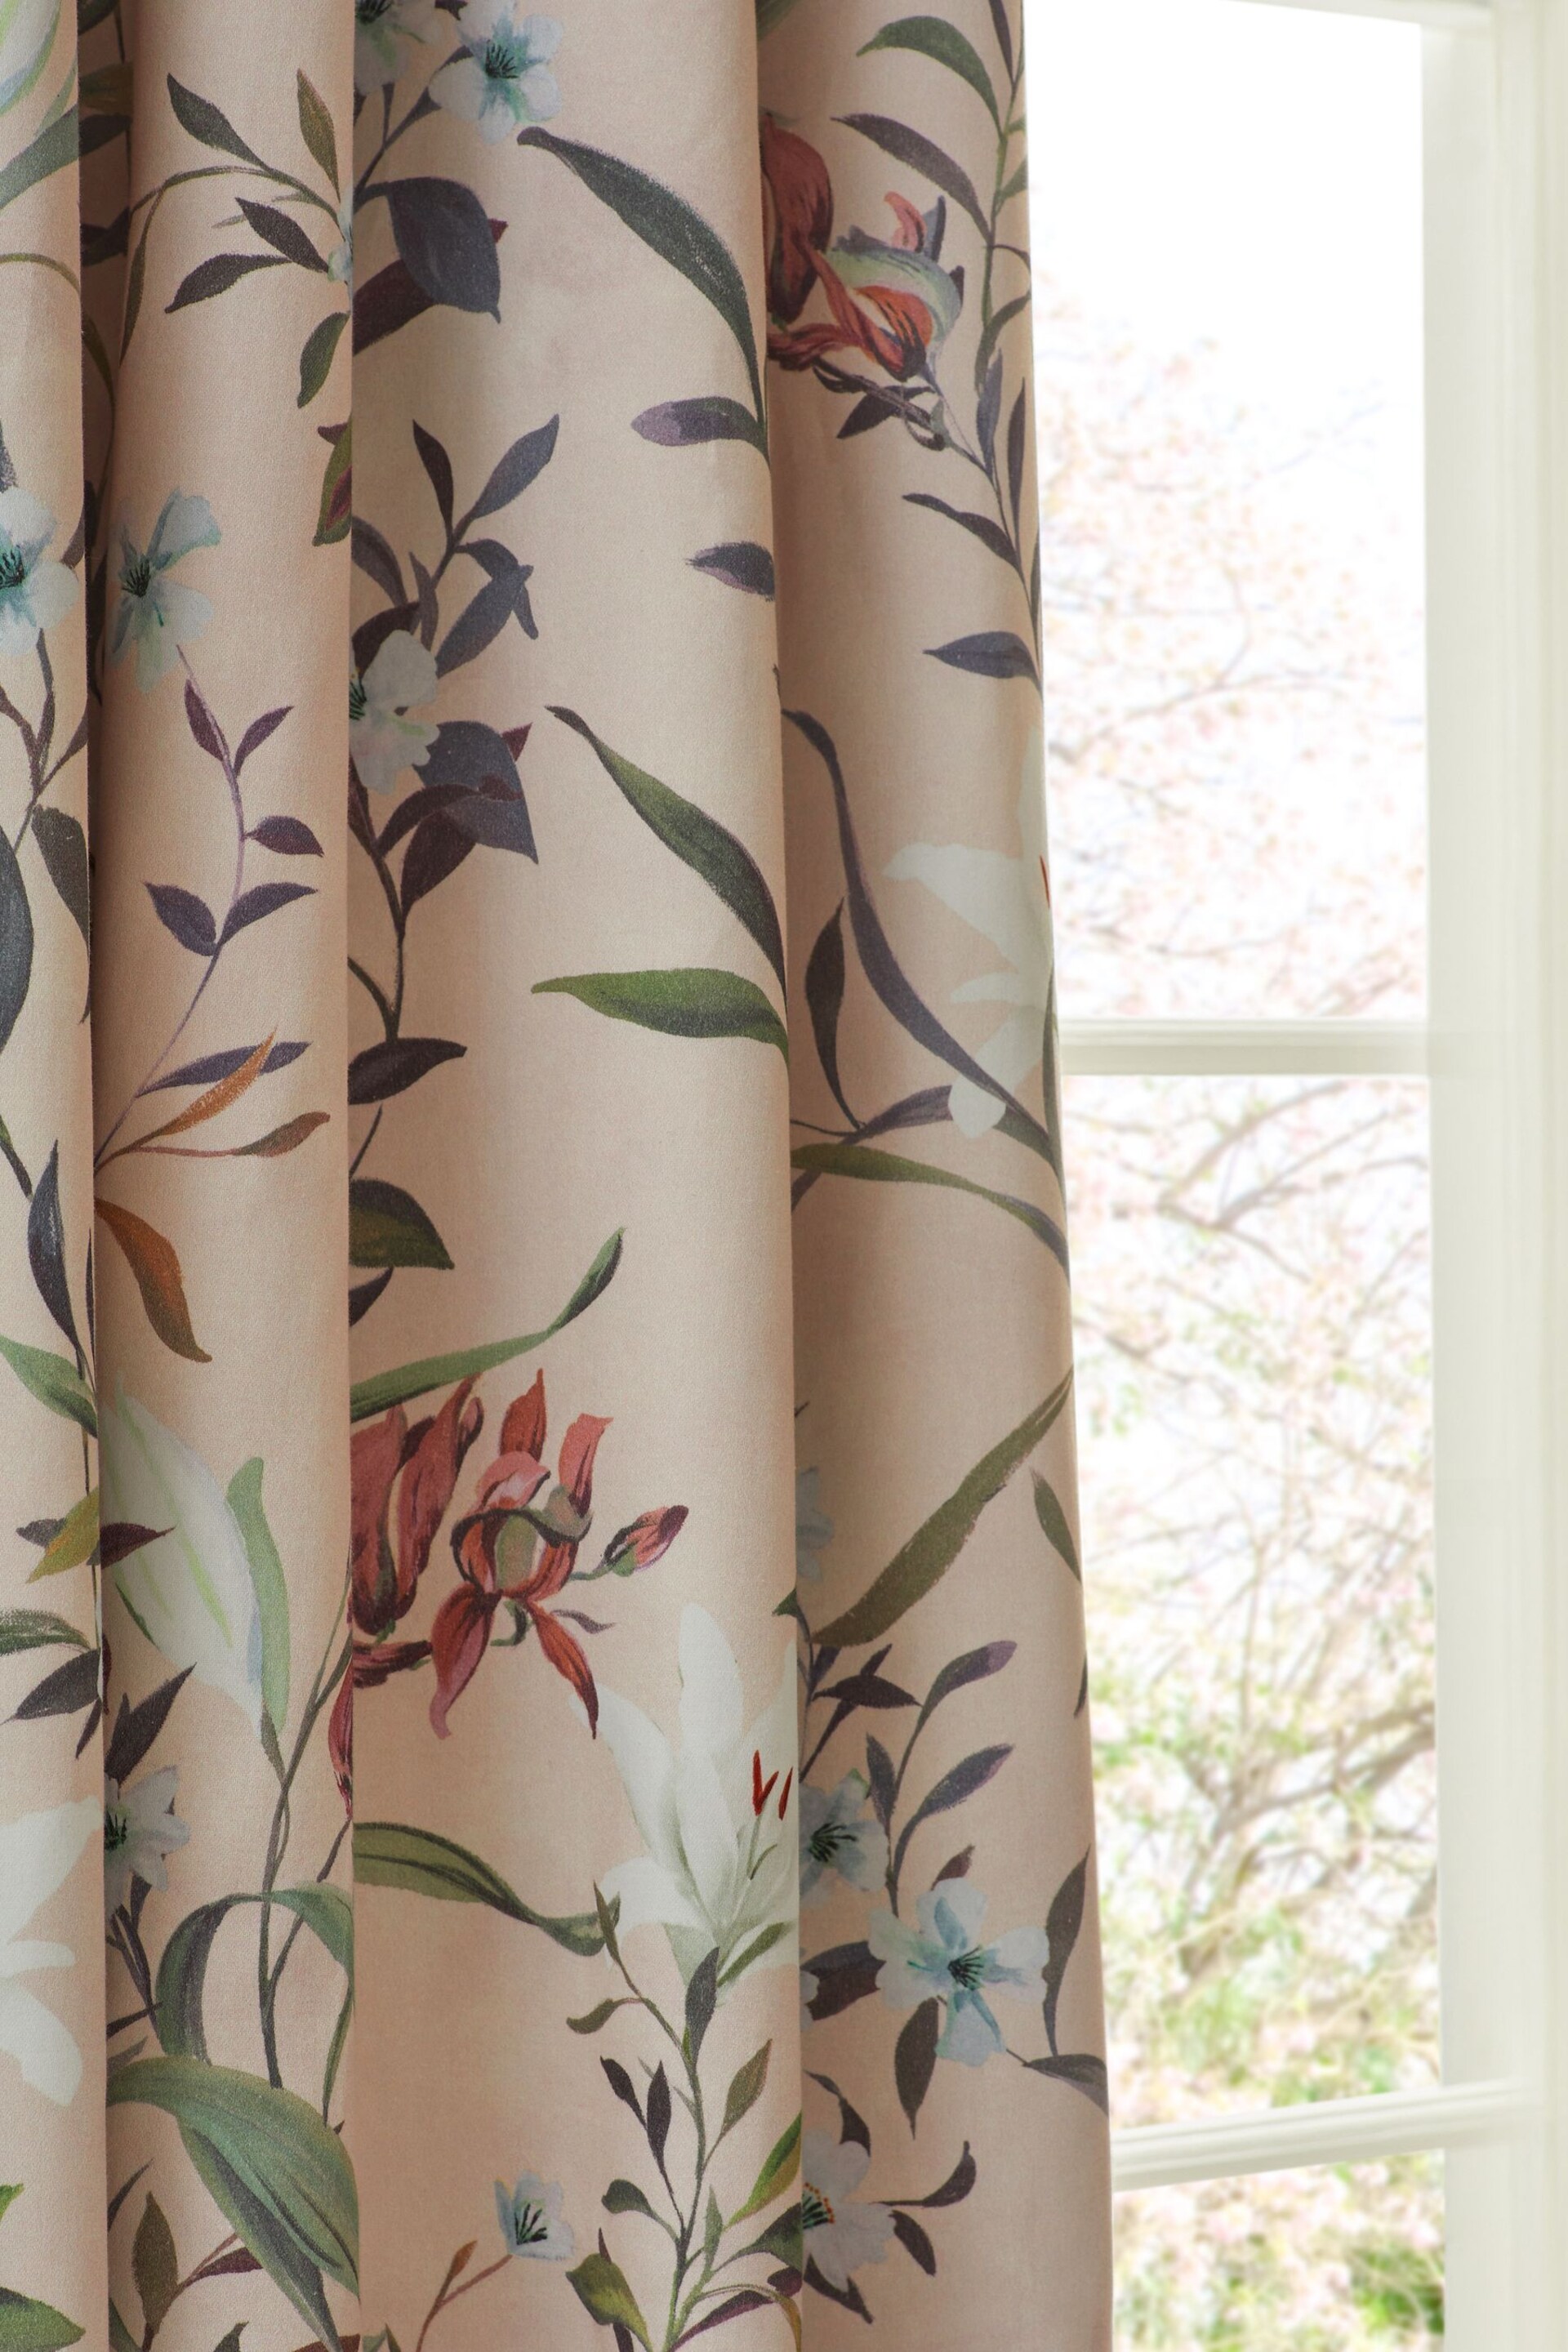 Pink Lily Floral Pencil Pleat Blackout/Thermal Curtains - Image 4 of 9